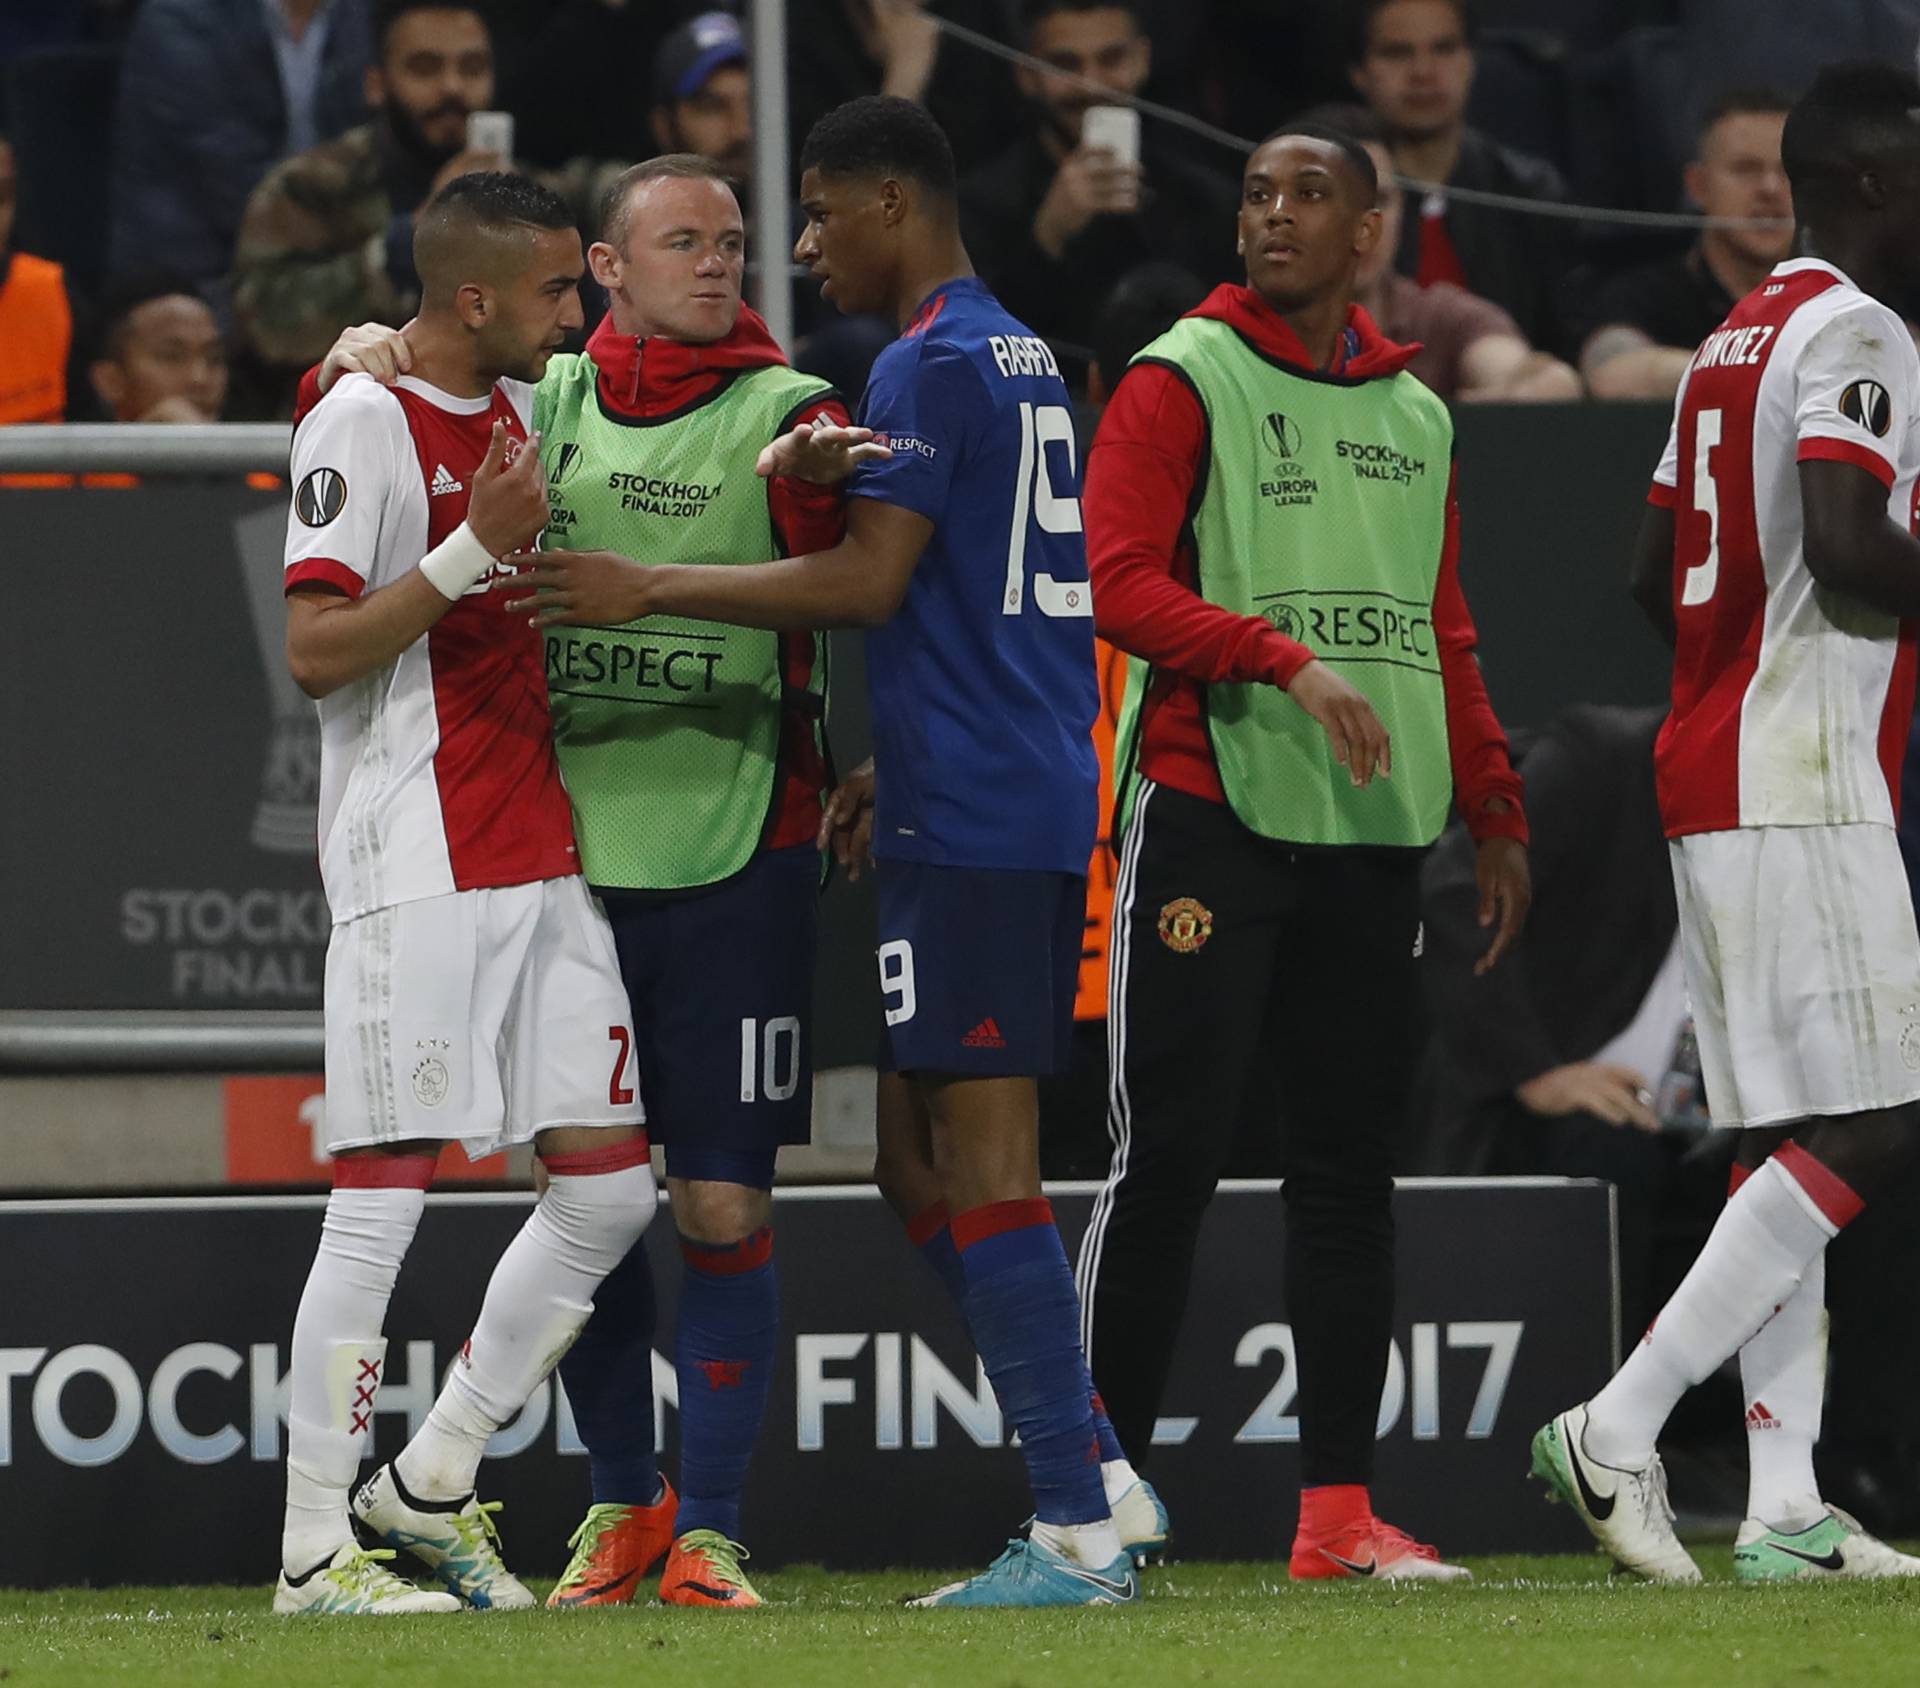 Ajax's Hakim Ziyech and Manchester United's Marcus Rashford clash as Manchester United's Wayne Rooney seperates them